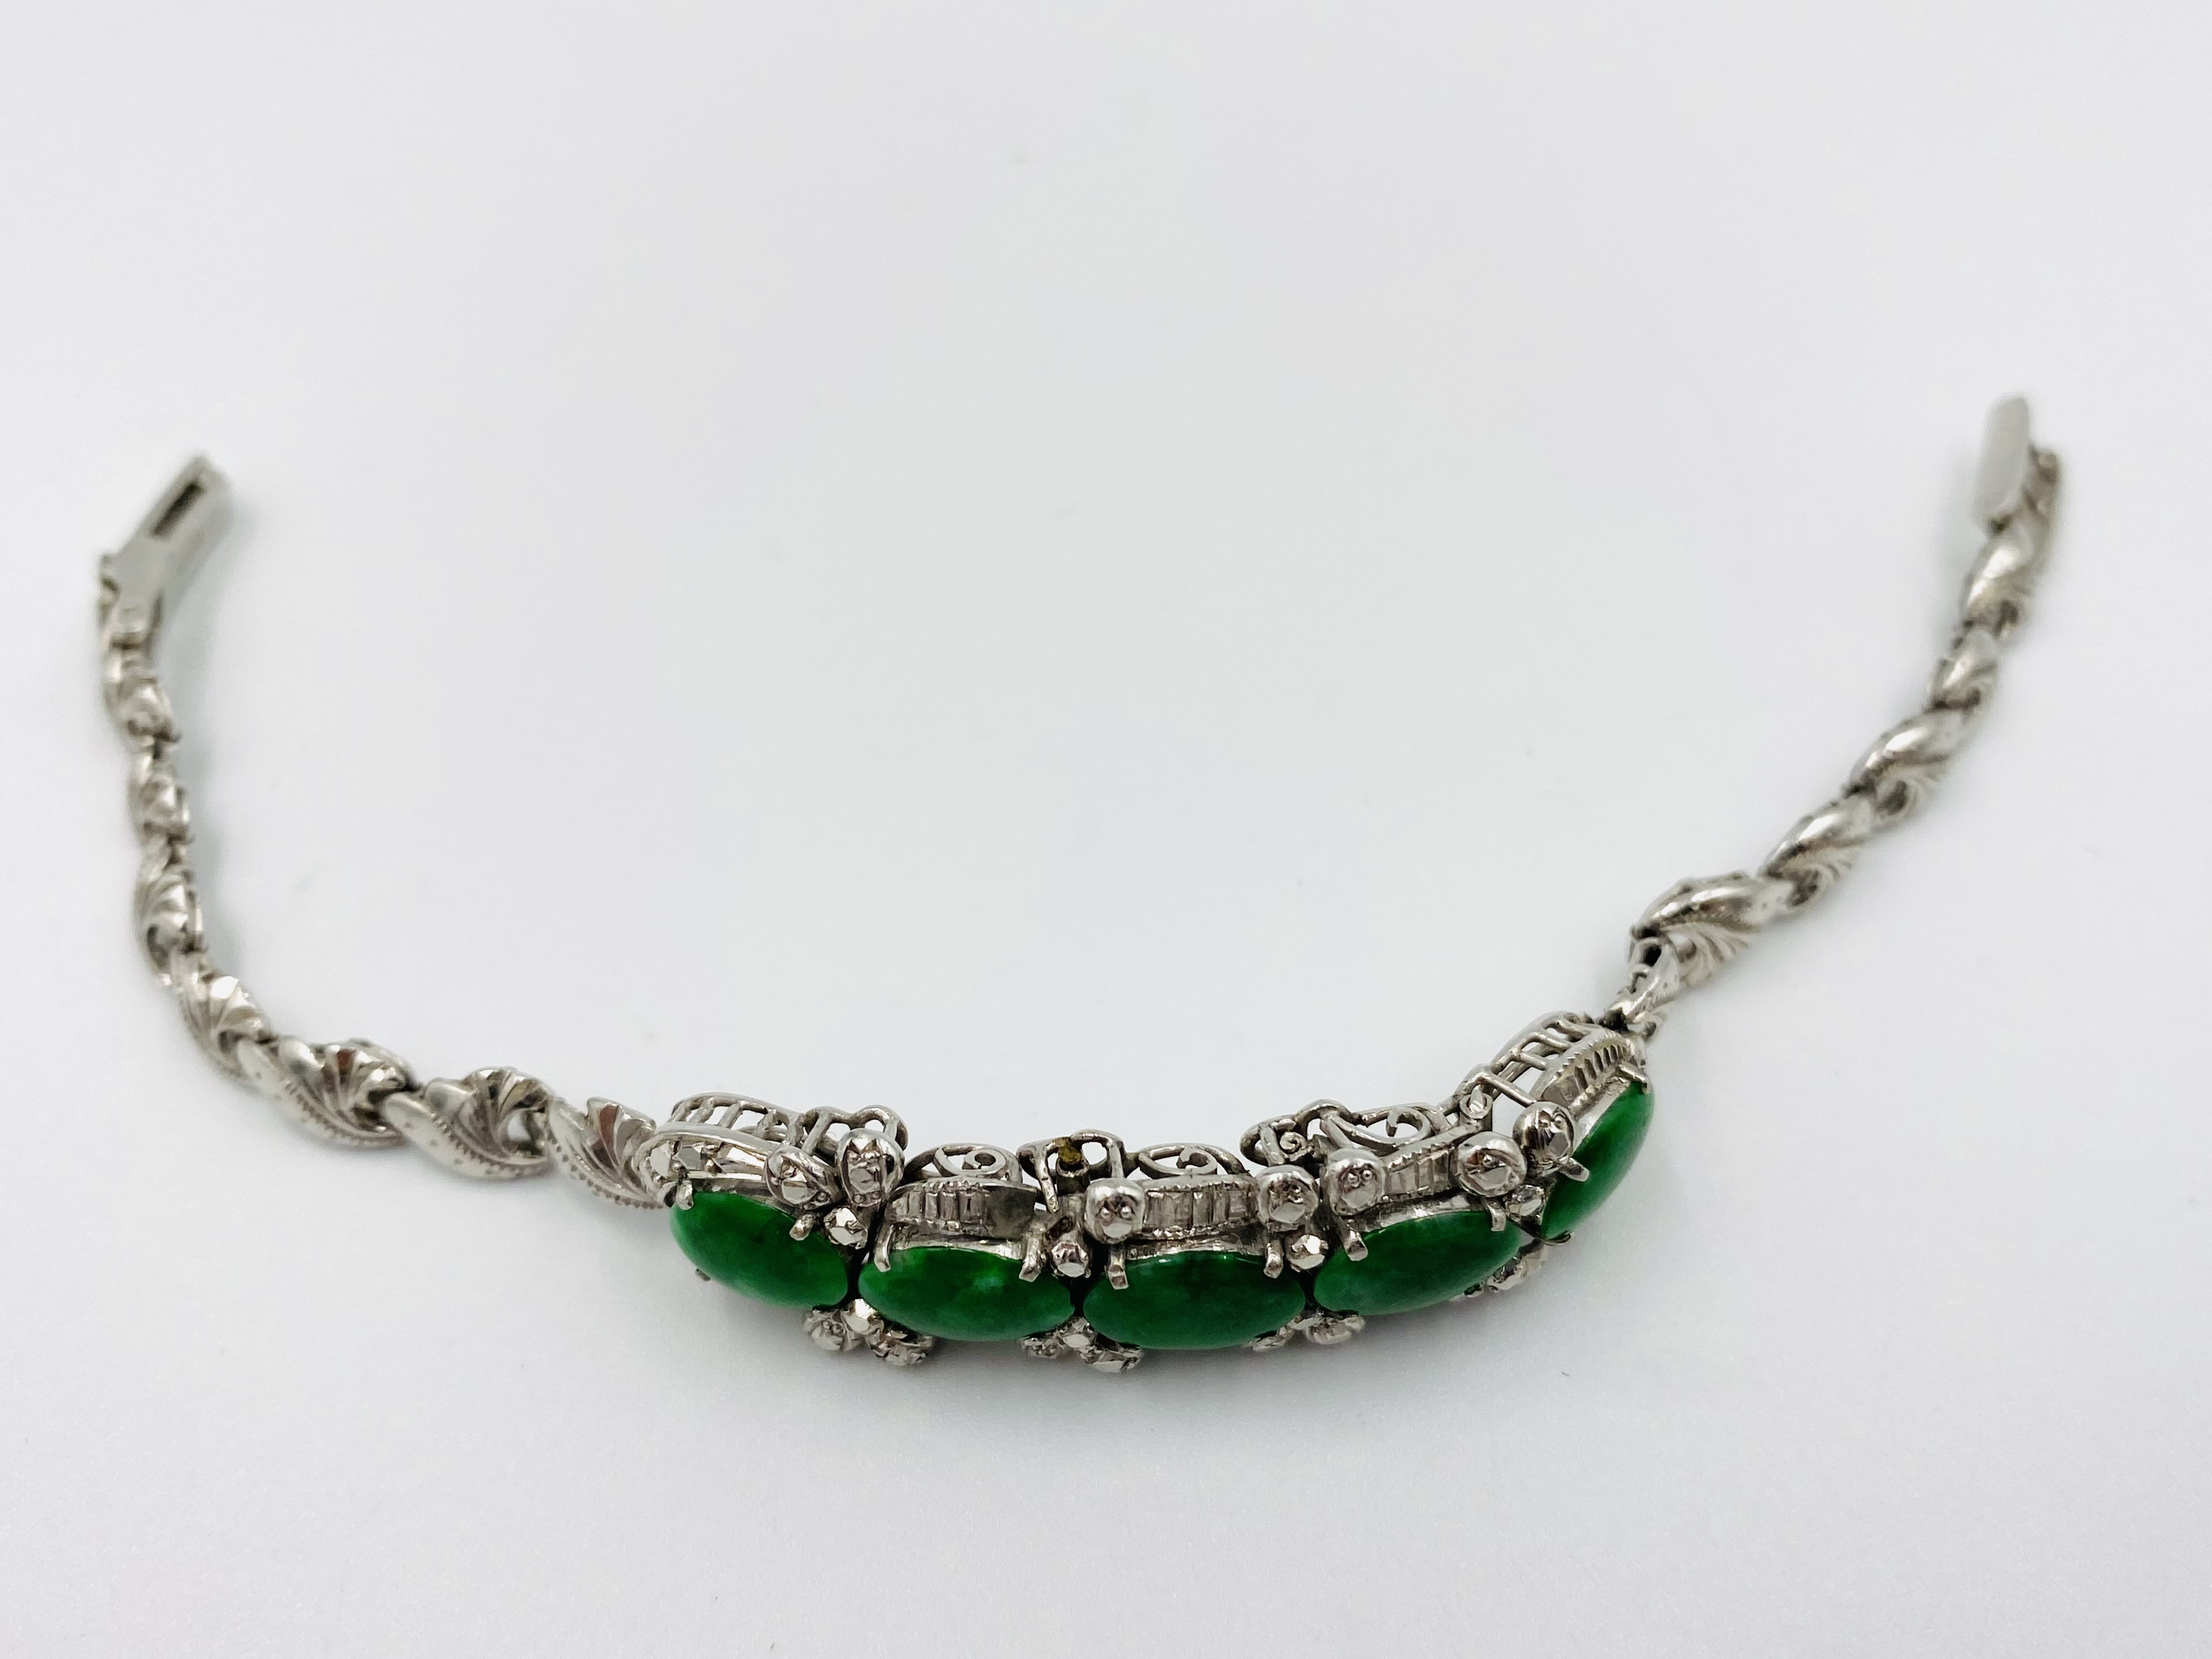 14ct white gold and jade bracelet - Image 3 of 5